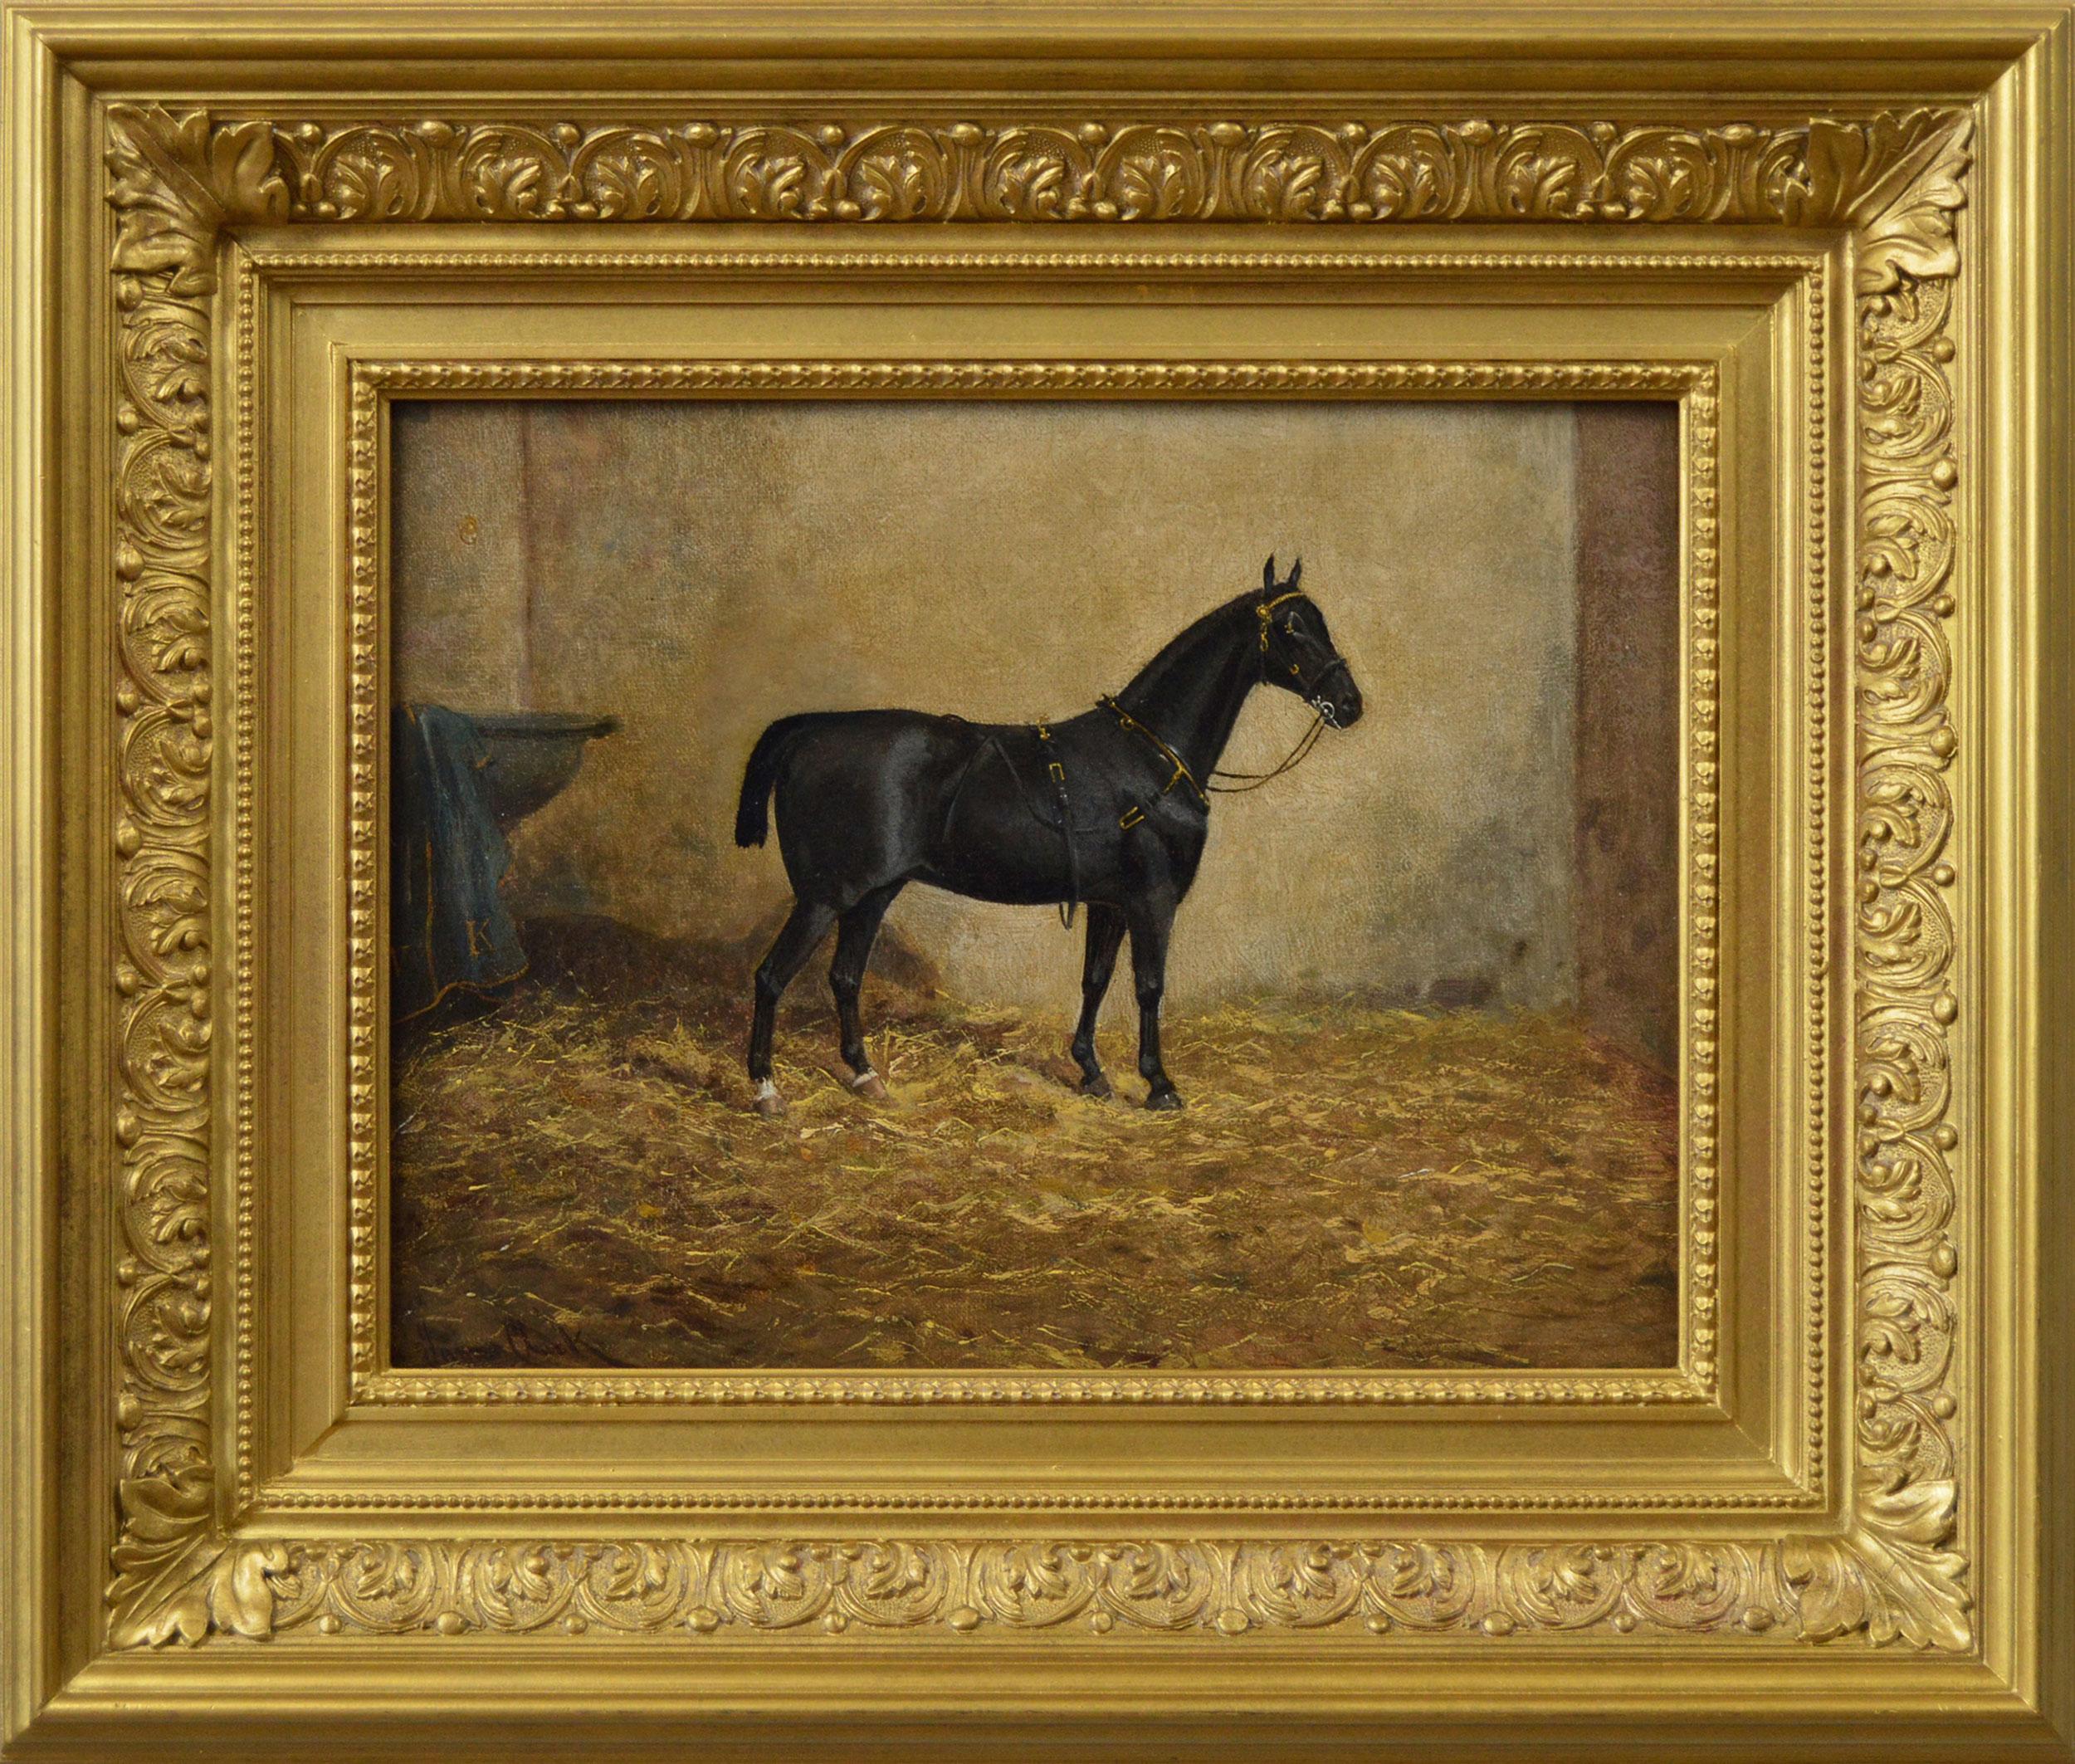 James Albert Clark Animal Painting - 19th Century sporting horse portrait oil painting of a hackney mare 